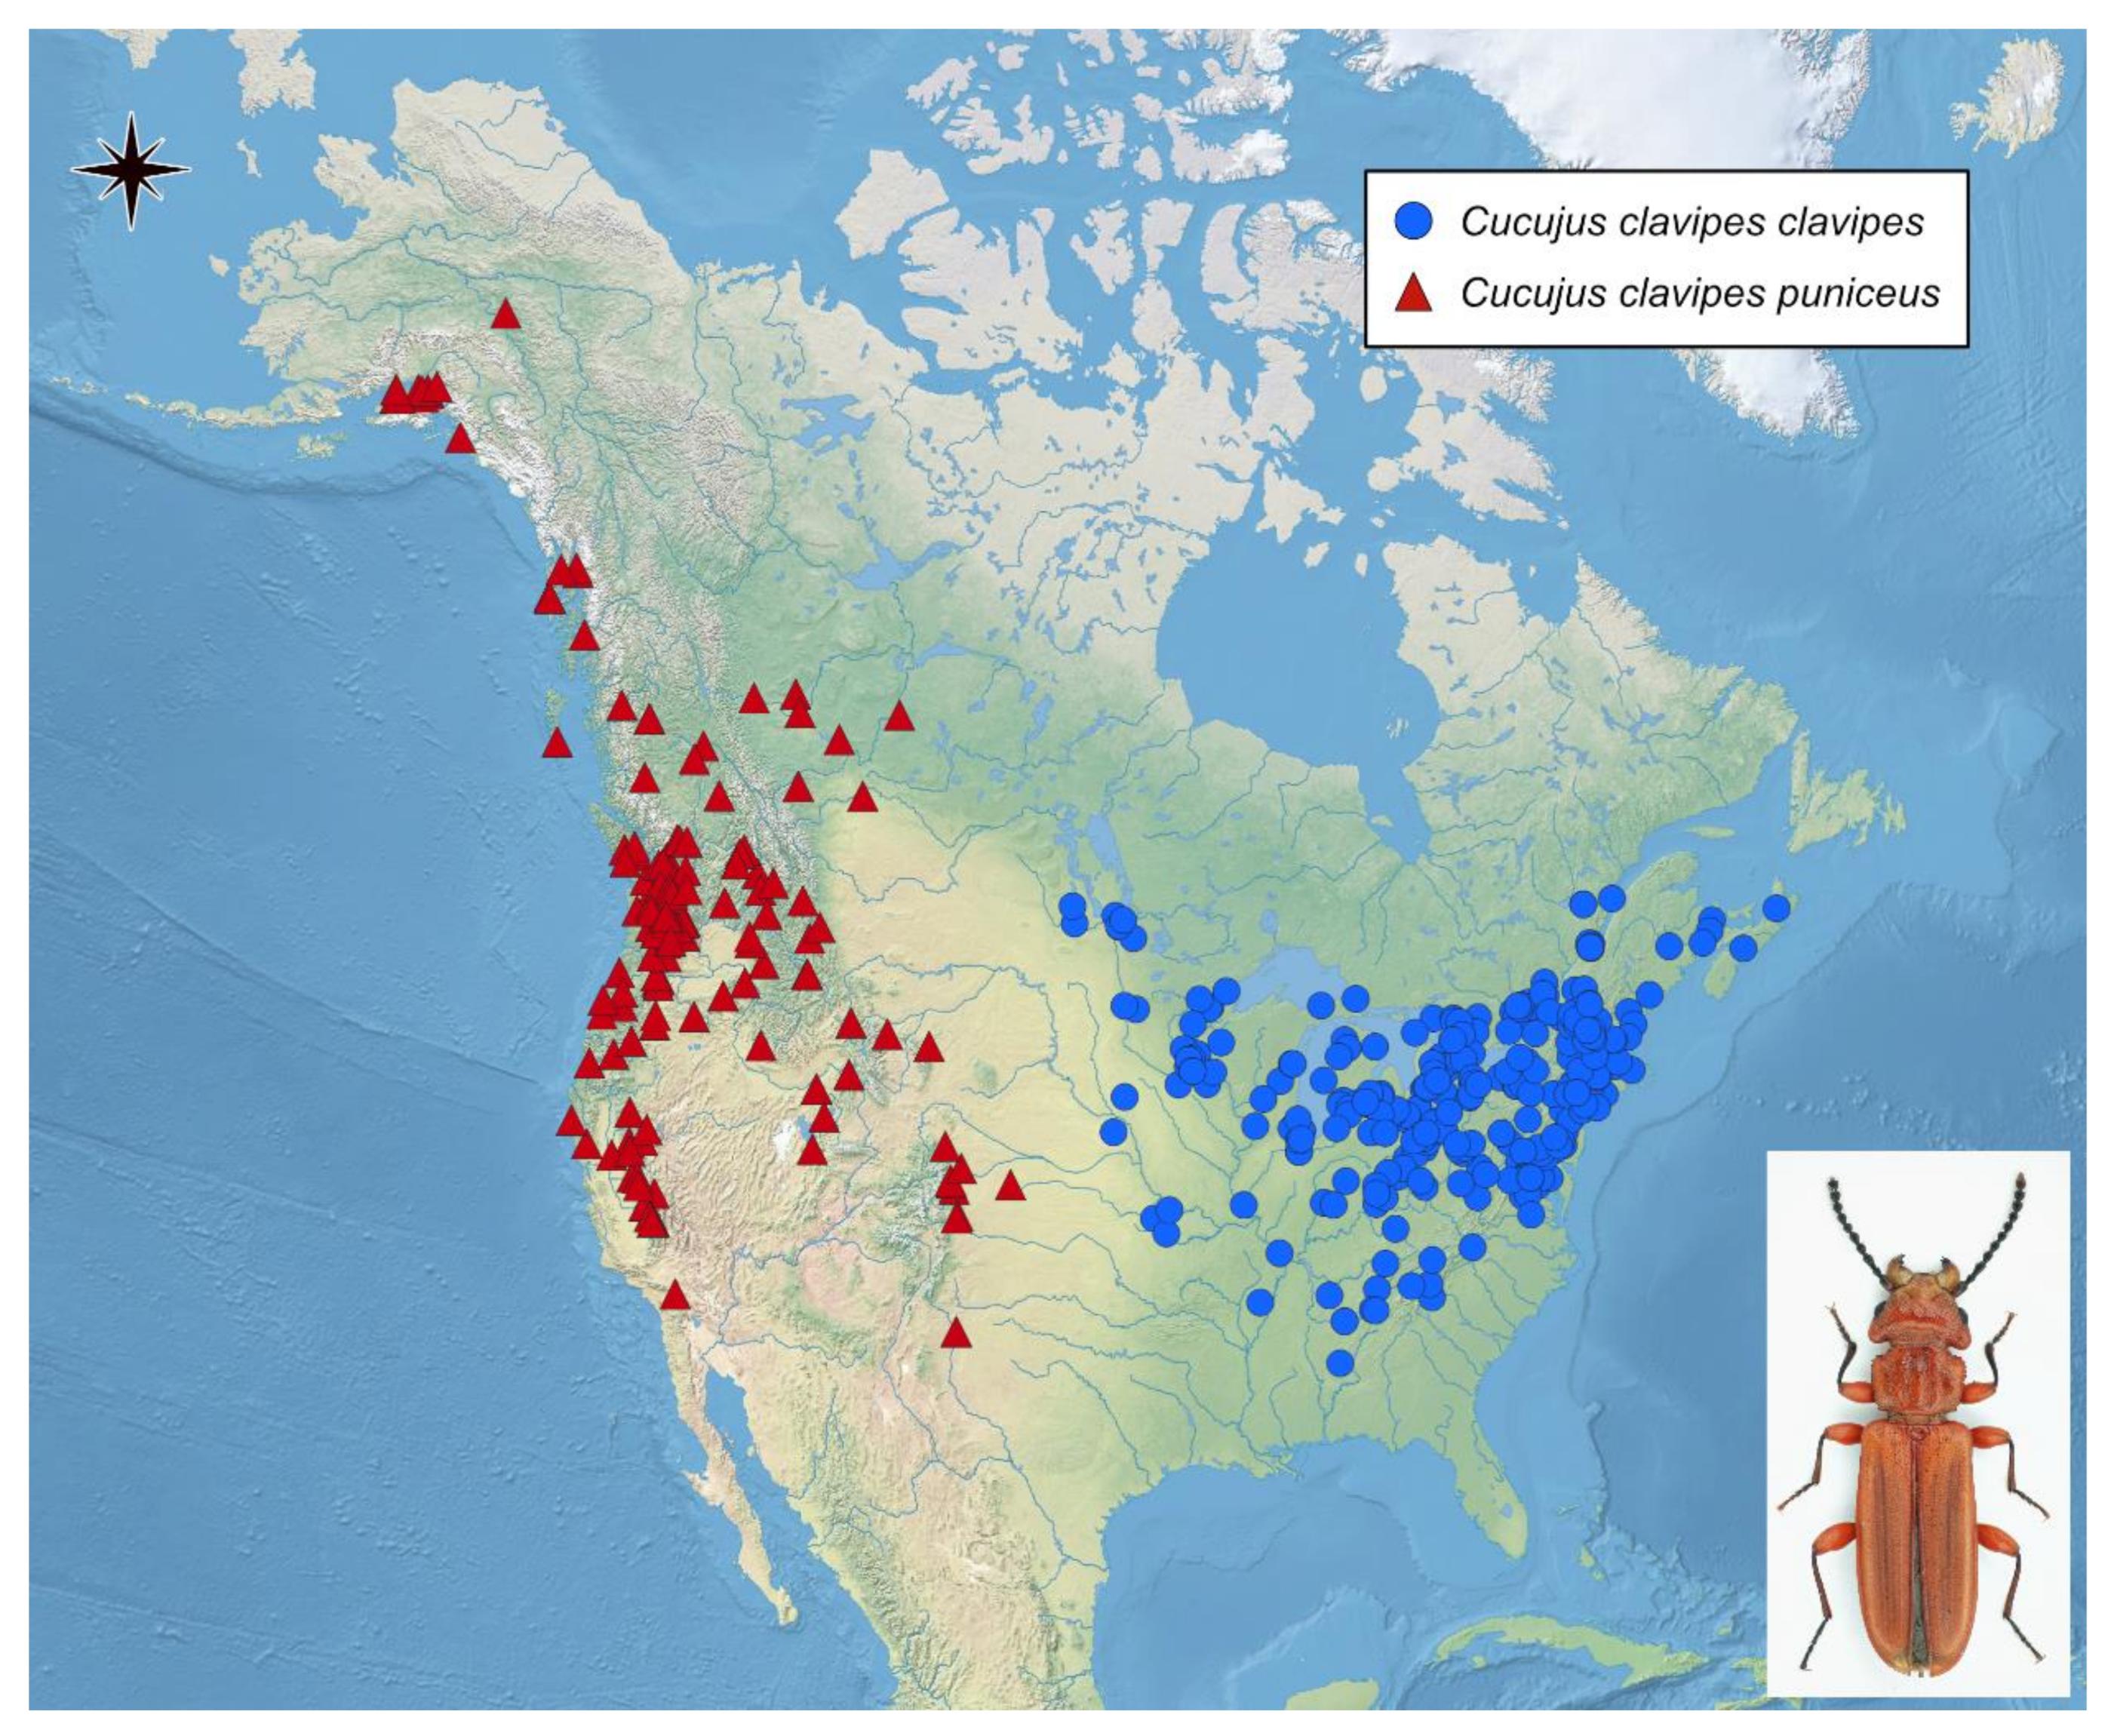 Insects | Free Full-Text | From Phenology and Habitat Preferences to  Climate Change: Importance of Citizen Science in Studying Insect Ecology in  the Continental Scale with American Red Flat Bark Beetle, Cucujus